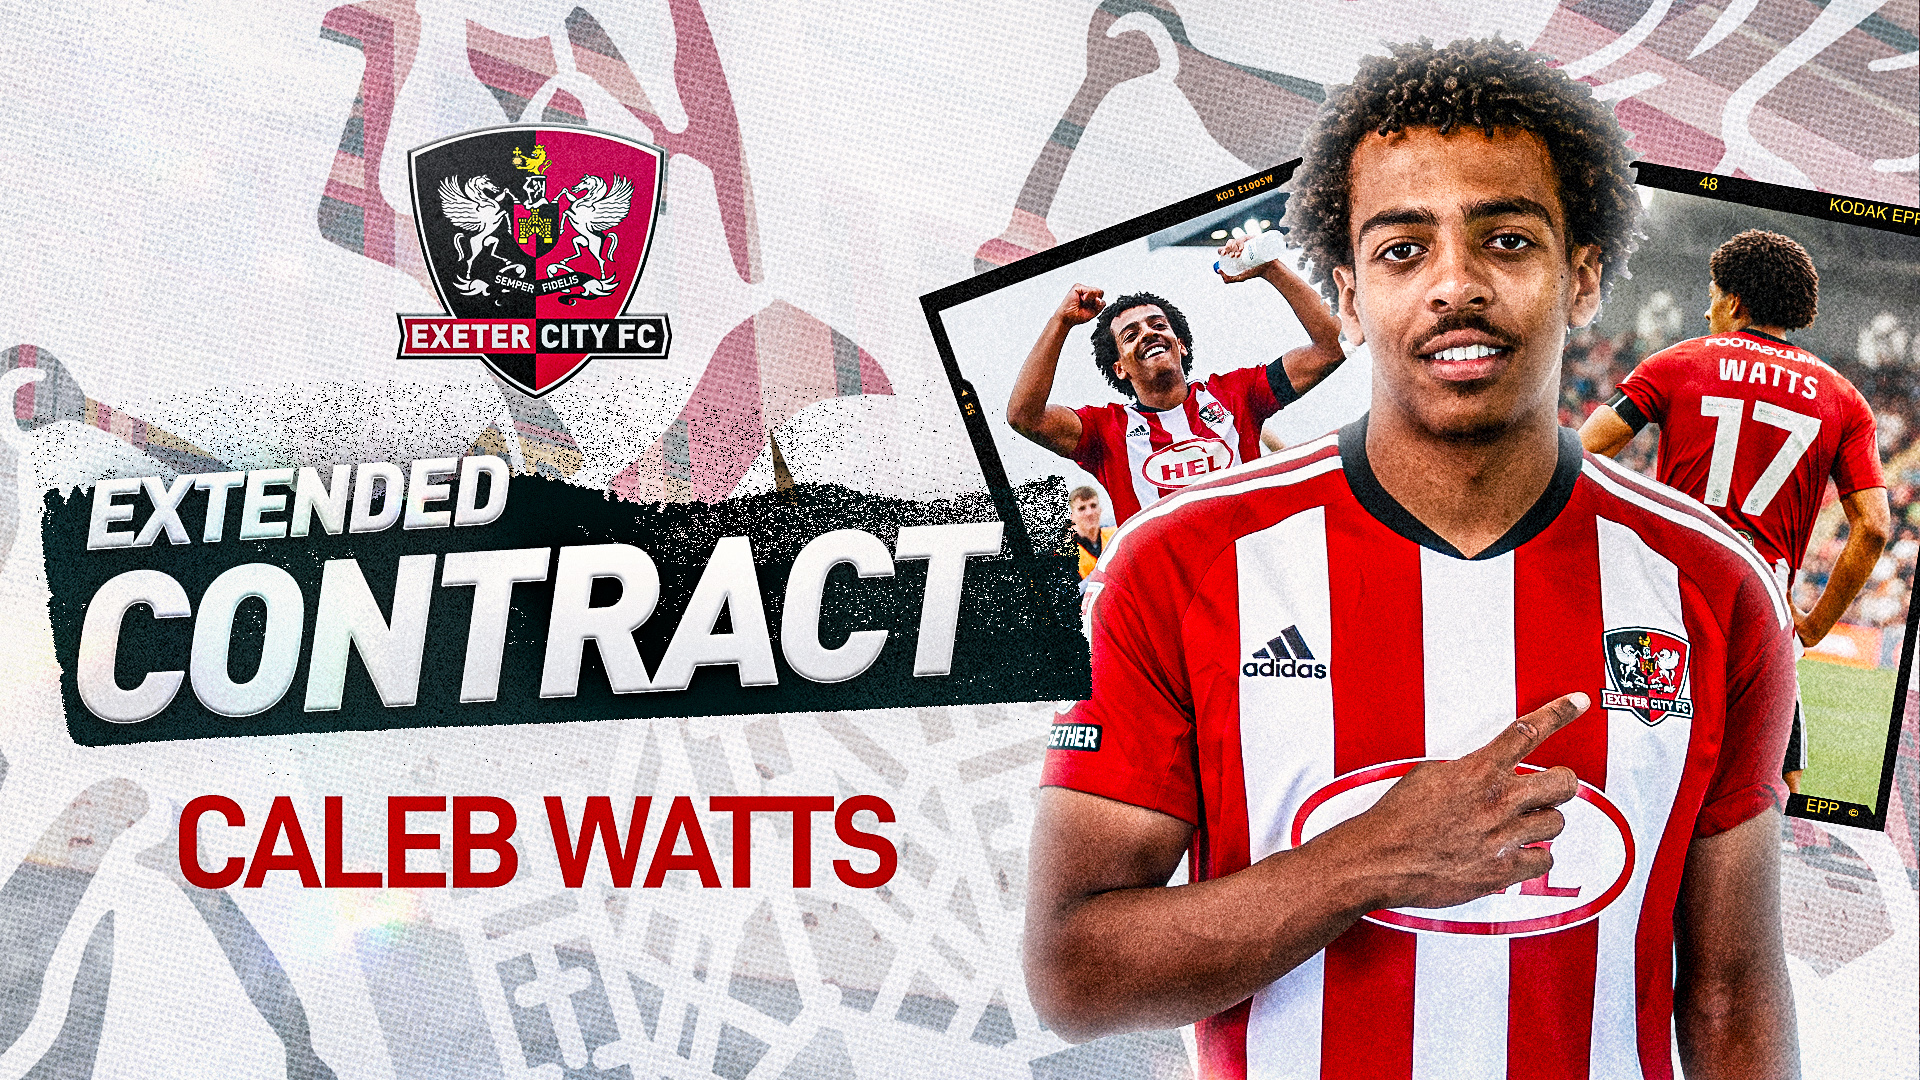 Image showing Caleb Watts with the text 'Extended Contract'